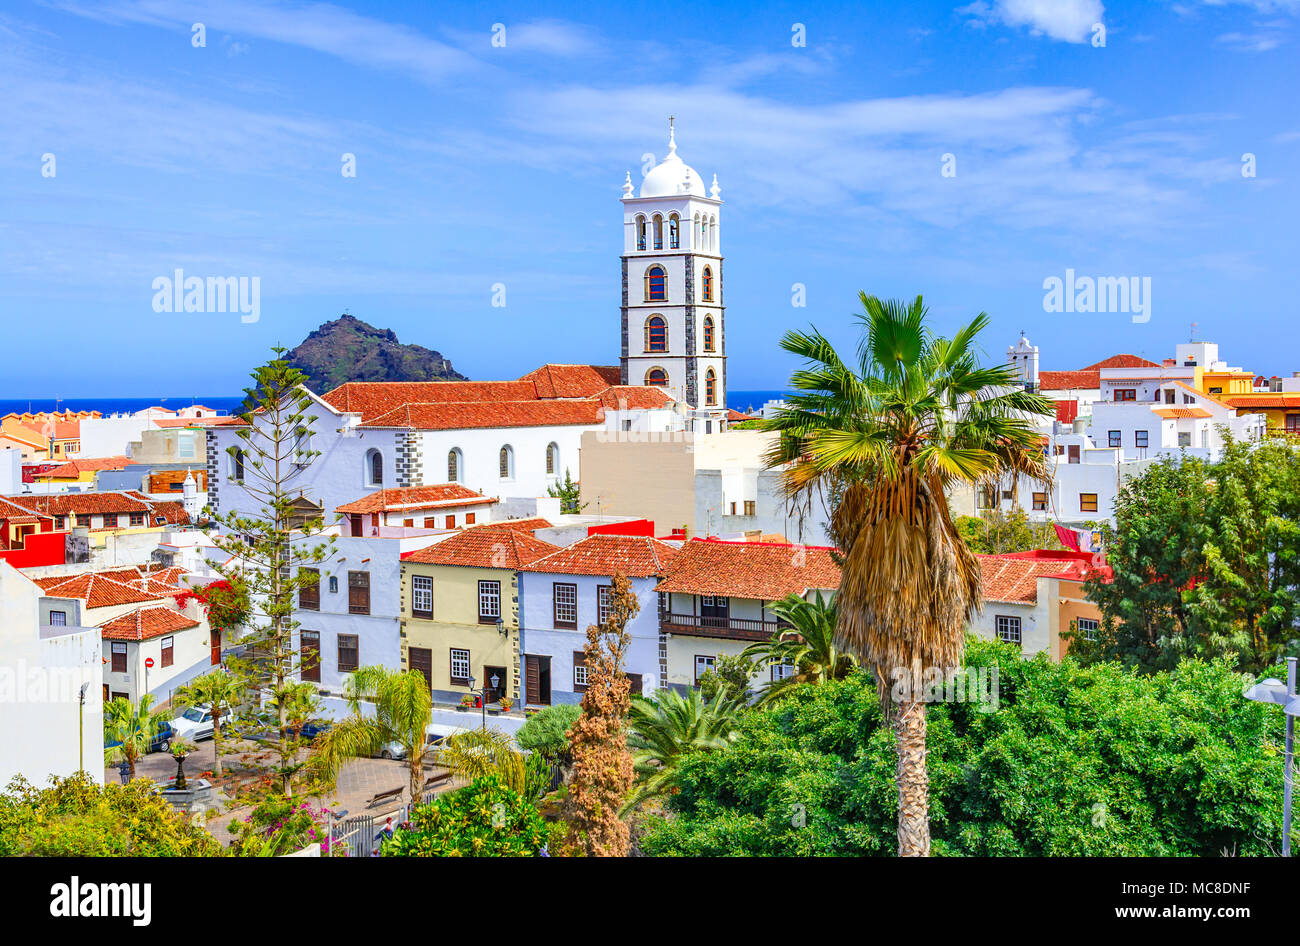 Garachico, Tenerife, Canary islands, Spain: Overview  of the colorful and beautiful town of Garachico. Stock Photo